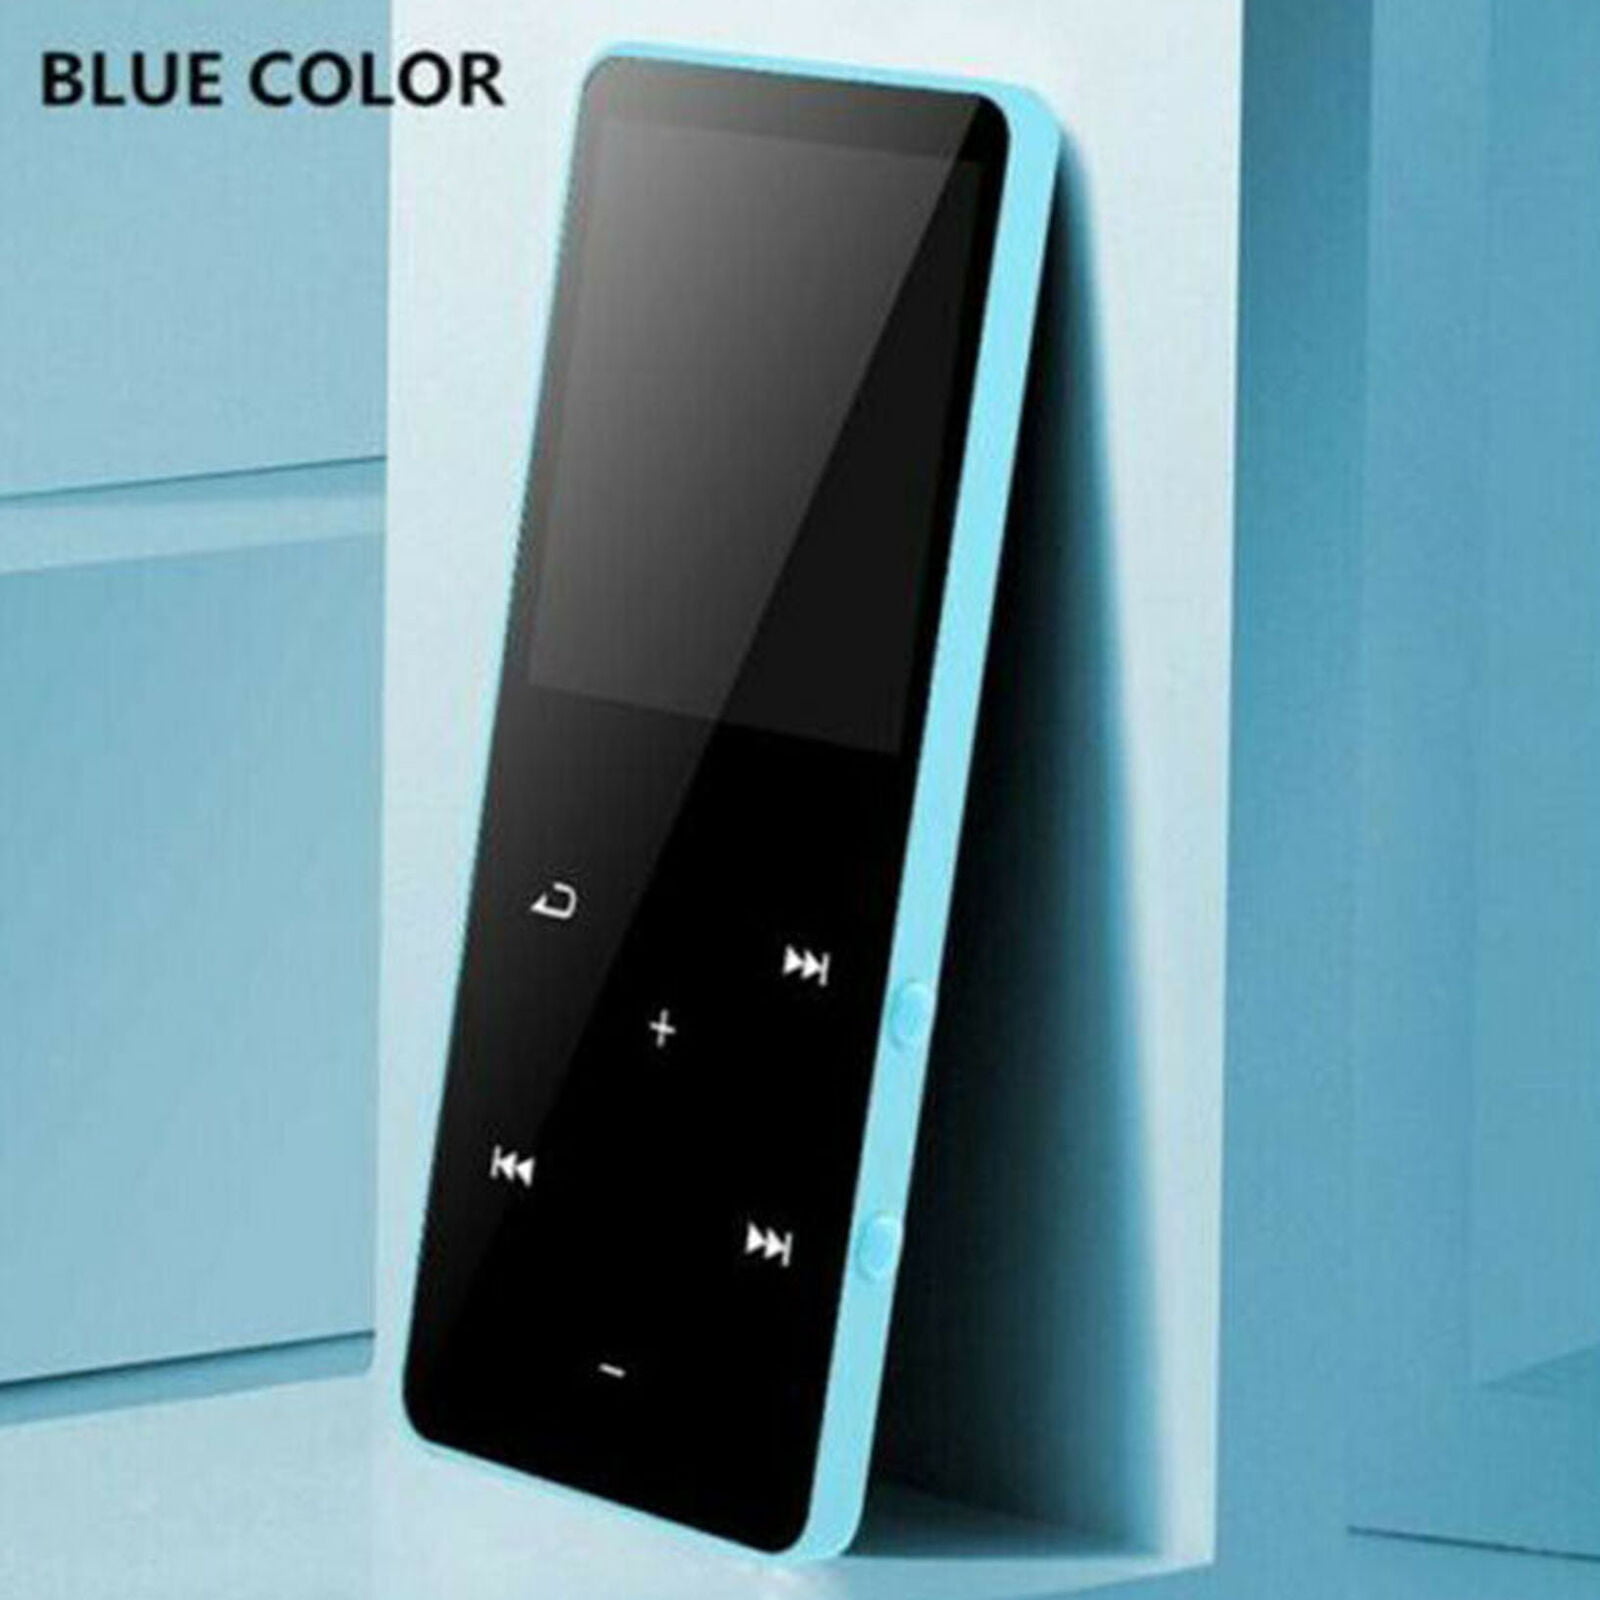 DishyKooker Blue-Tooth MP3 Player HiFi Sport Music Speakers MP4 Media FM Radio Recorder 8GB with Blue-Tooth Electronic Products for Gifts